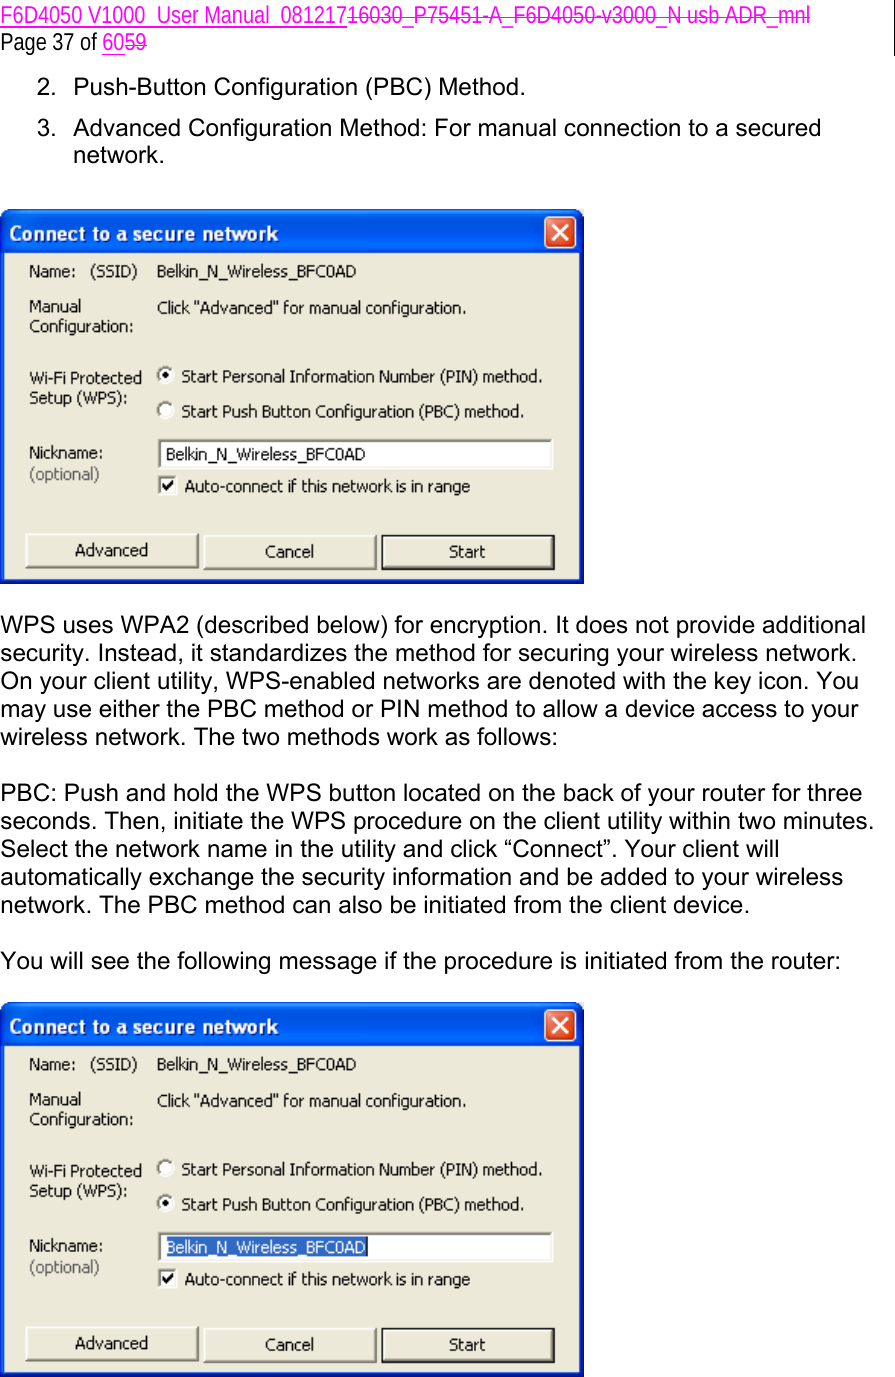 F6D4050 V1000_User Manual_08121716030_P75451-A_F6D4050-v3000_N usb ADR_mnl  Page 37 of 6059 2.  Push-Button Configuration (PBC) Method. 3.  Advanced Configuration Method: For manual connection to a secured network.     WPS uses WPA2 (described below) for encryption. It does not provide additional security. Instead, it standardizes the method for securing your wireless network. On your client utility, WPS-enabled networks are denoted with the key icon. You may use either the PBC method or PIN method to allow a device access to your wireless network. The two methods work as follows:  PBC: Push and hold the WPS button located on the back of your router for three seconds. Then, initiate the WPS procedure on the client utility within two minutes. Select the network name in the utility and click “Connect”. Your client will automatically exchange the security information and be added to your wireless network. The PBC method can also be initiated from the client device.  You will see the following message if the procedure is initiated from the router:   